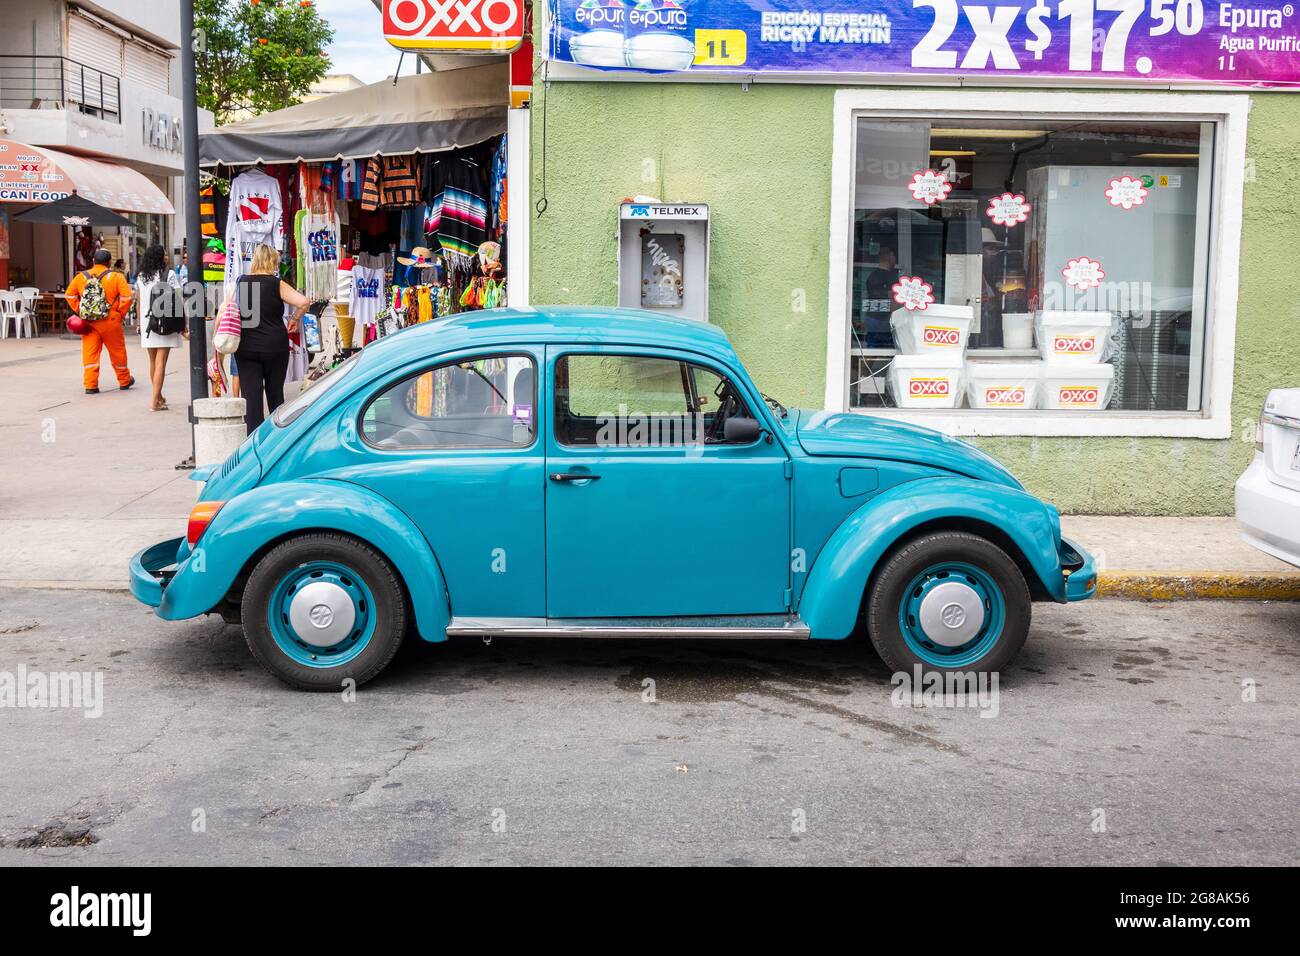 Blue Classic Vintage Original Volkswagen Beetle In Cozumel Mexico Parked On A City Street, Known As A Volkswagen Bug In The U.S. Stock Photo